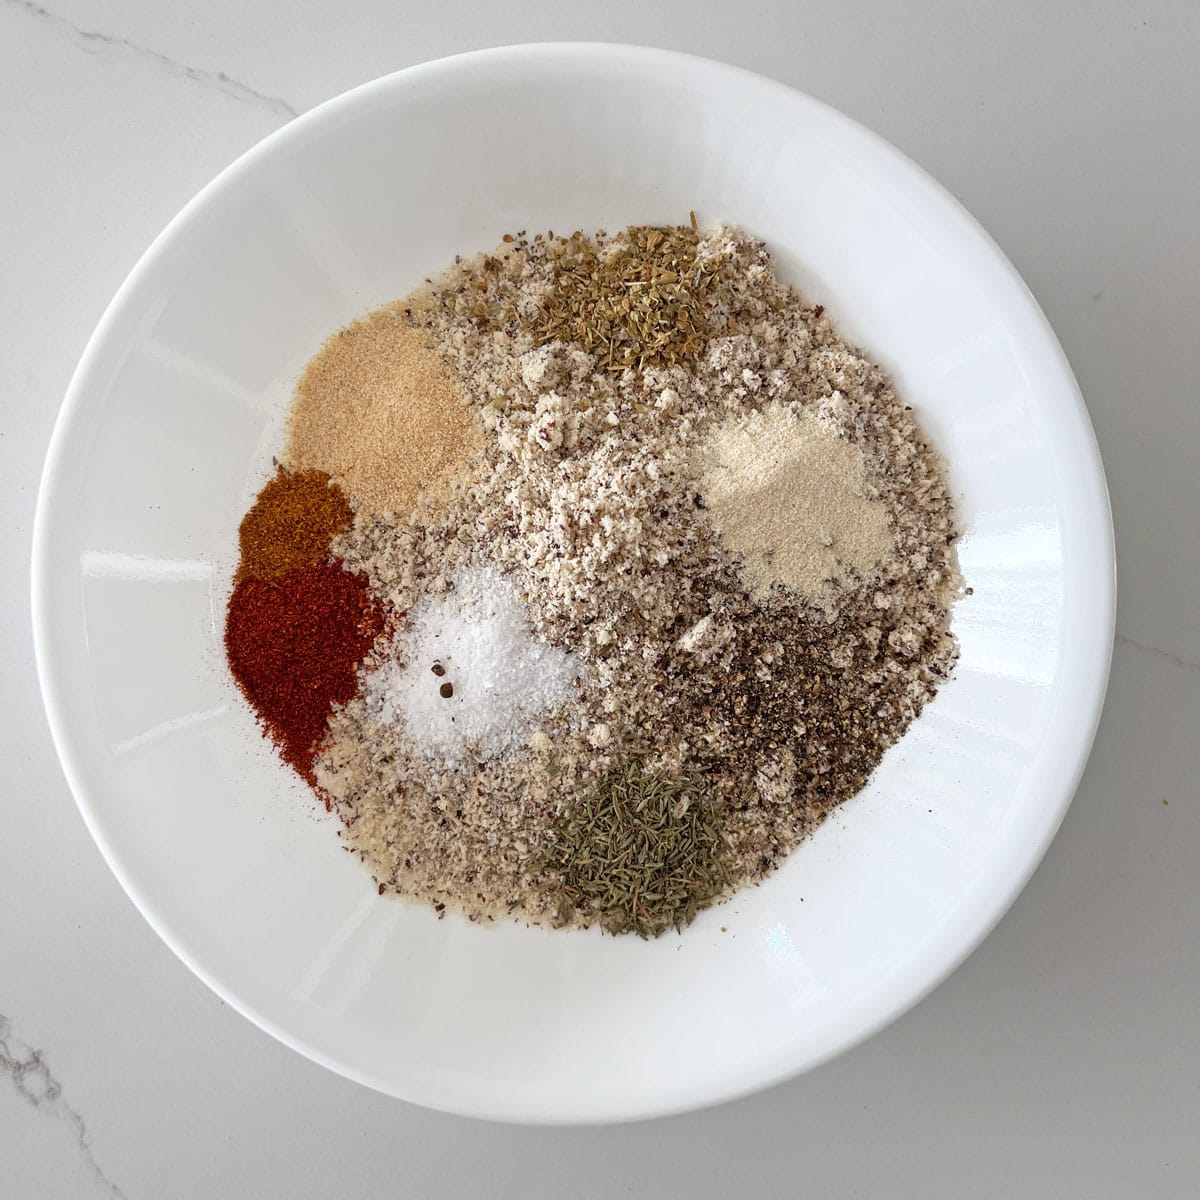 Almond meal and spices in a white bowl.